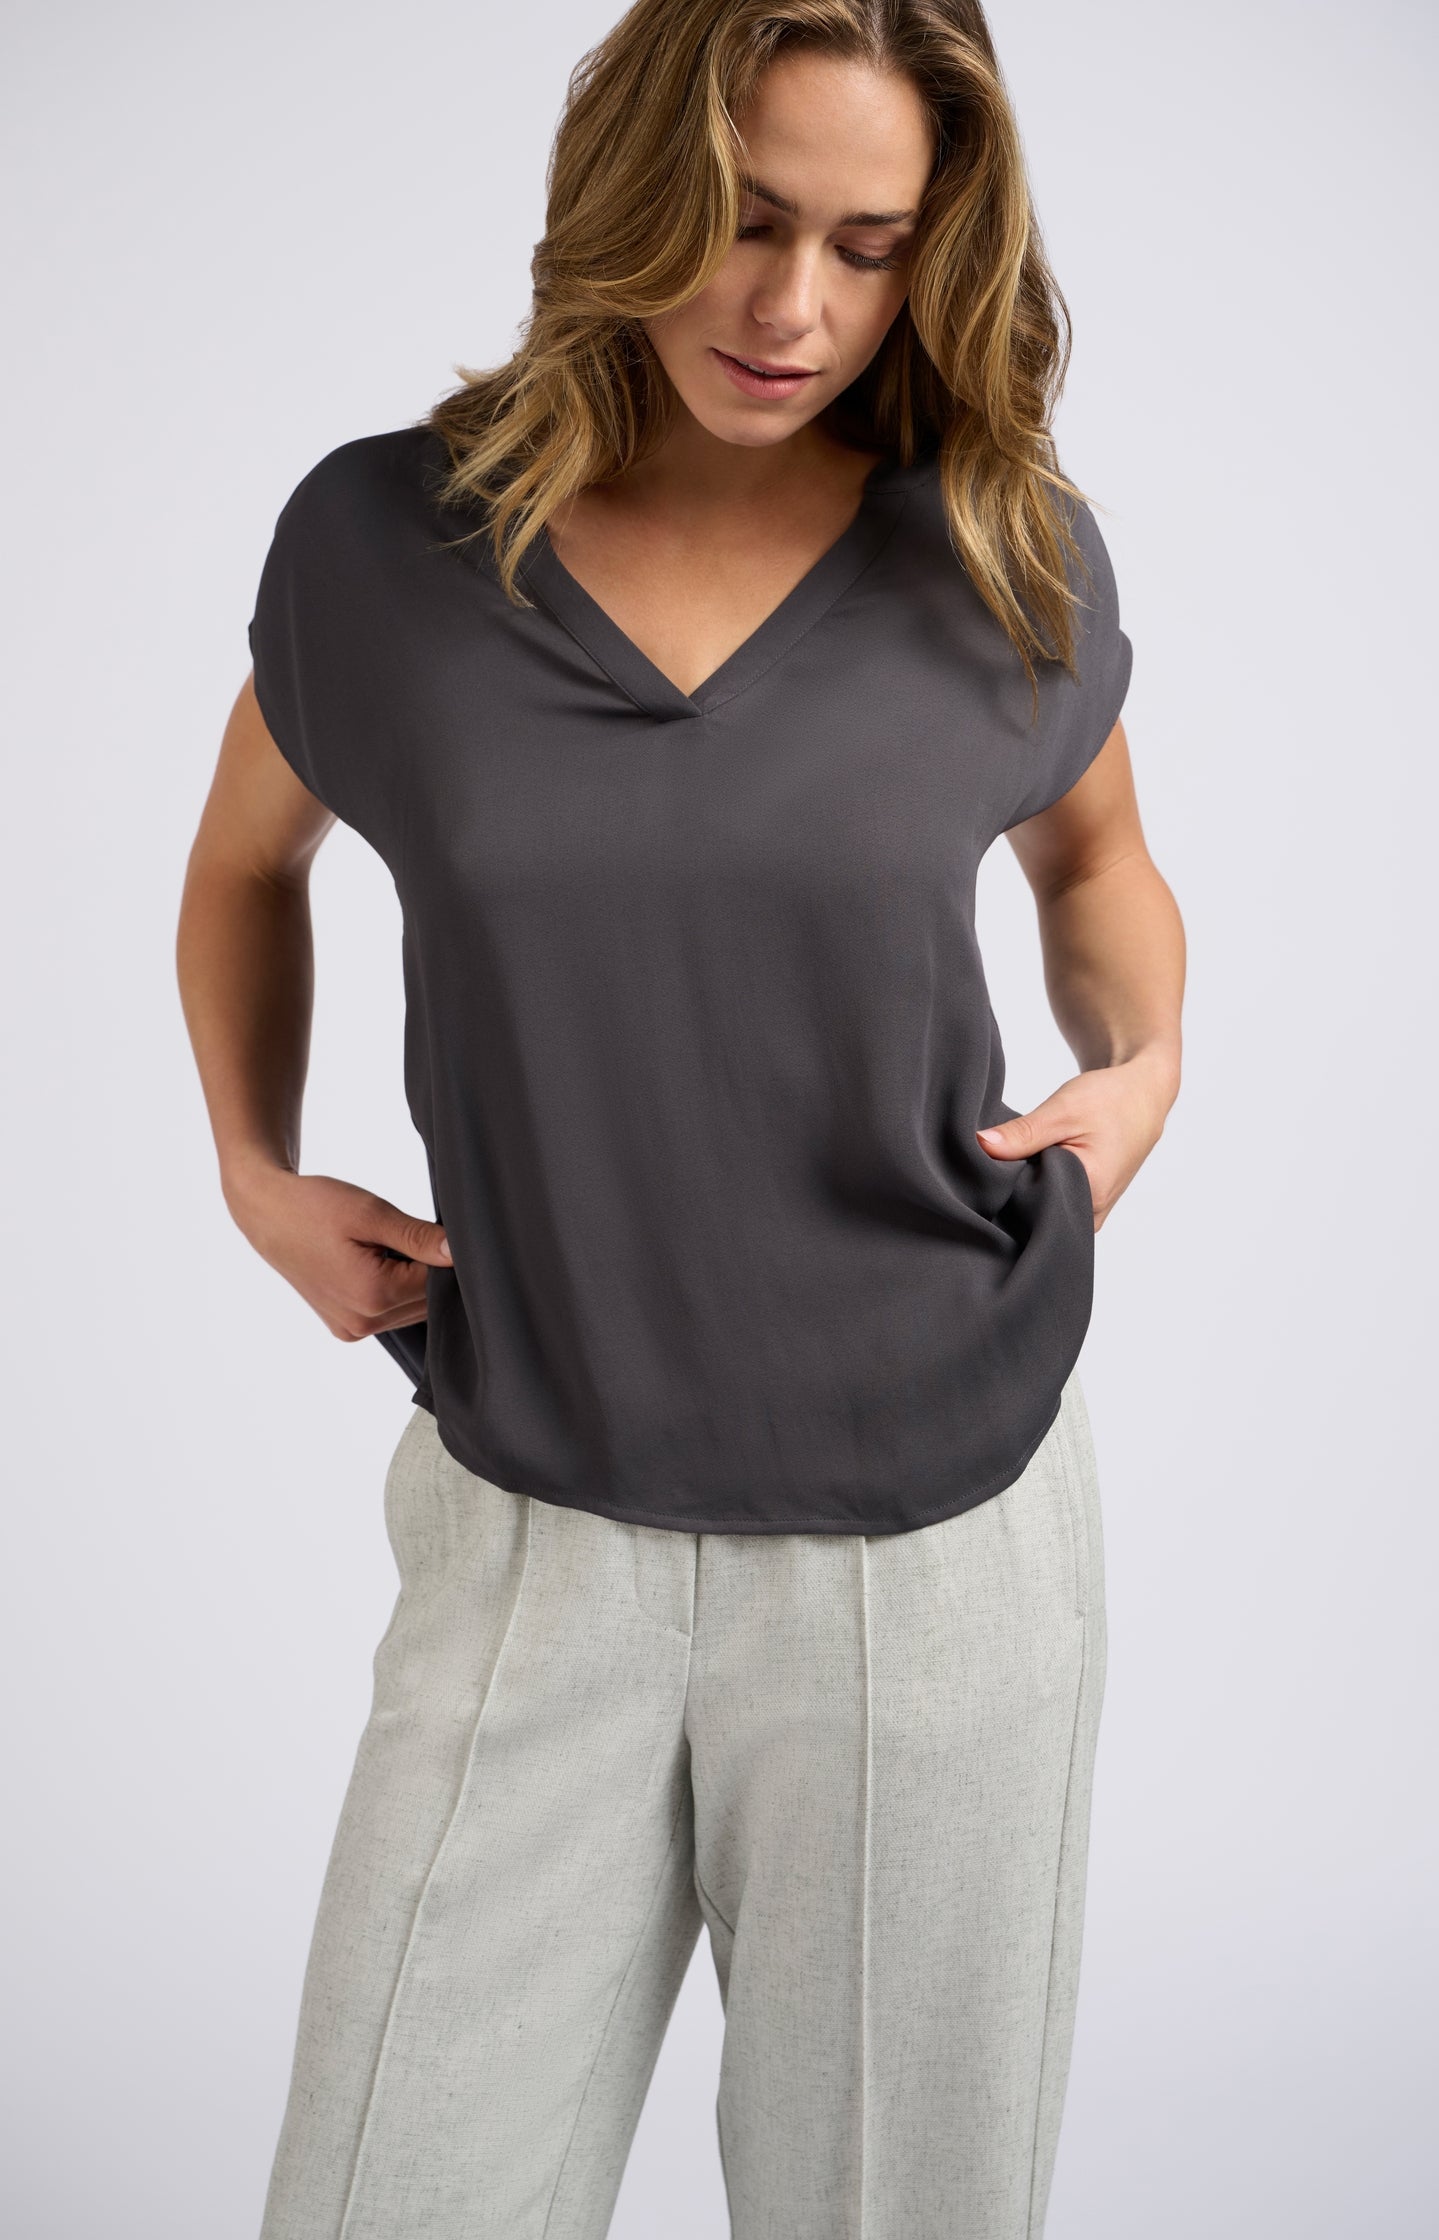 Sleeveless top with V-neck in mixed materials